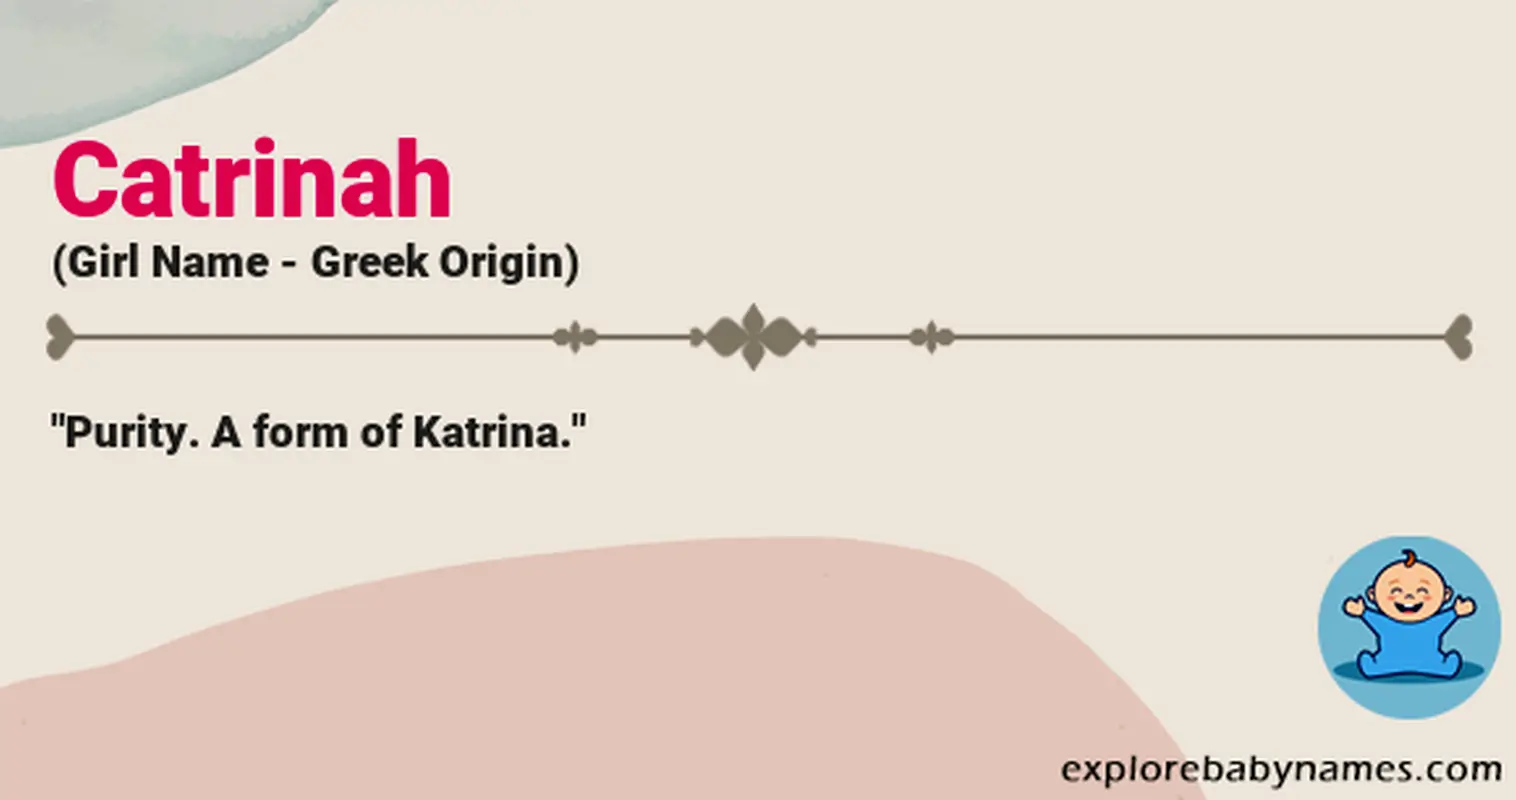 Meaning of Catrinah